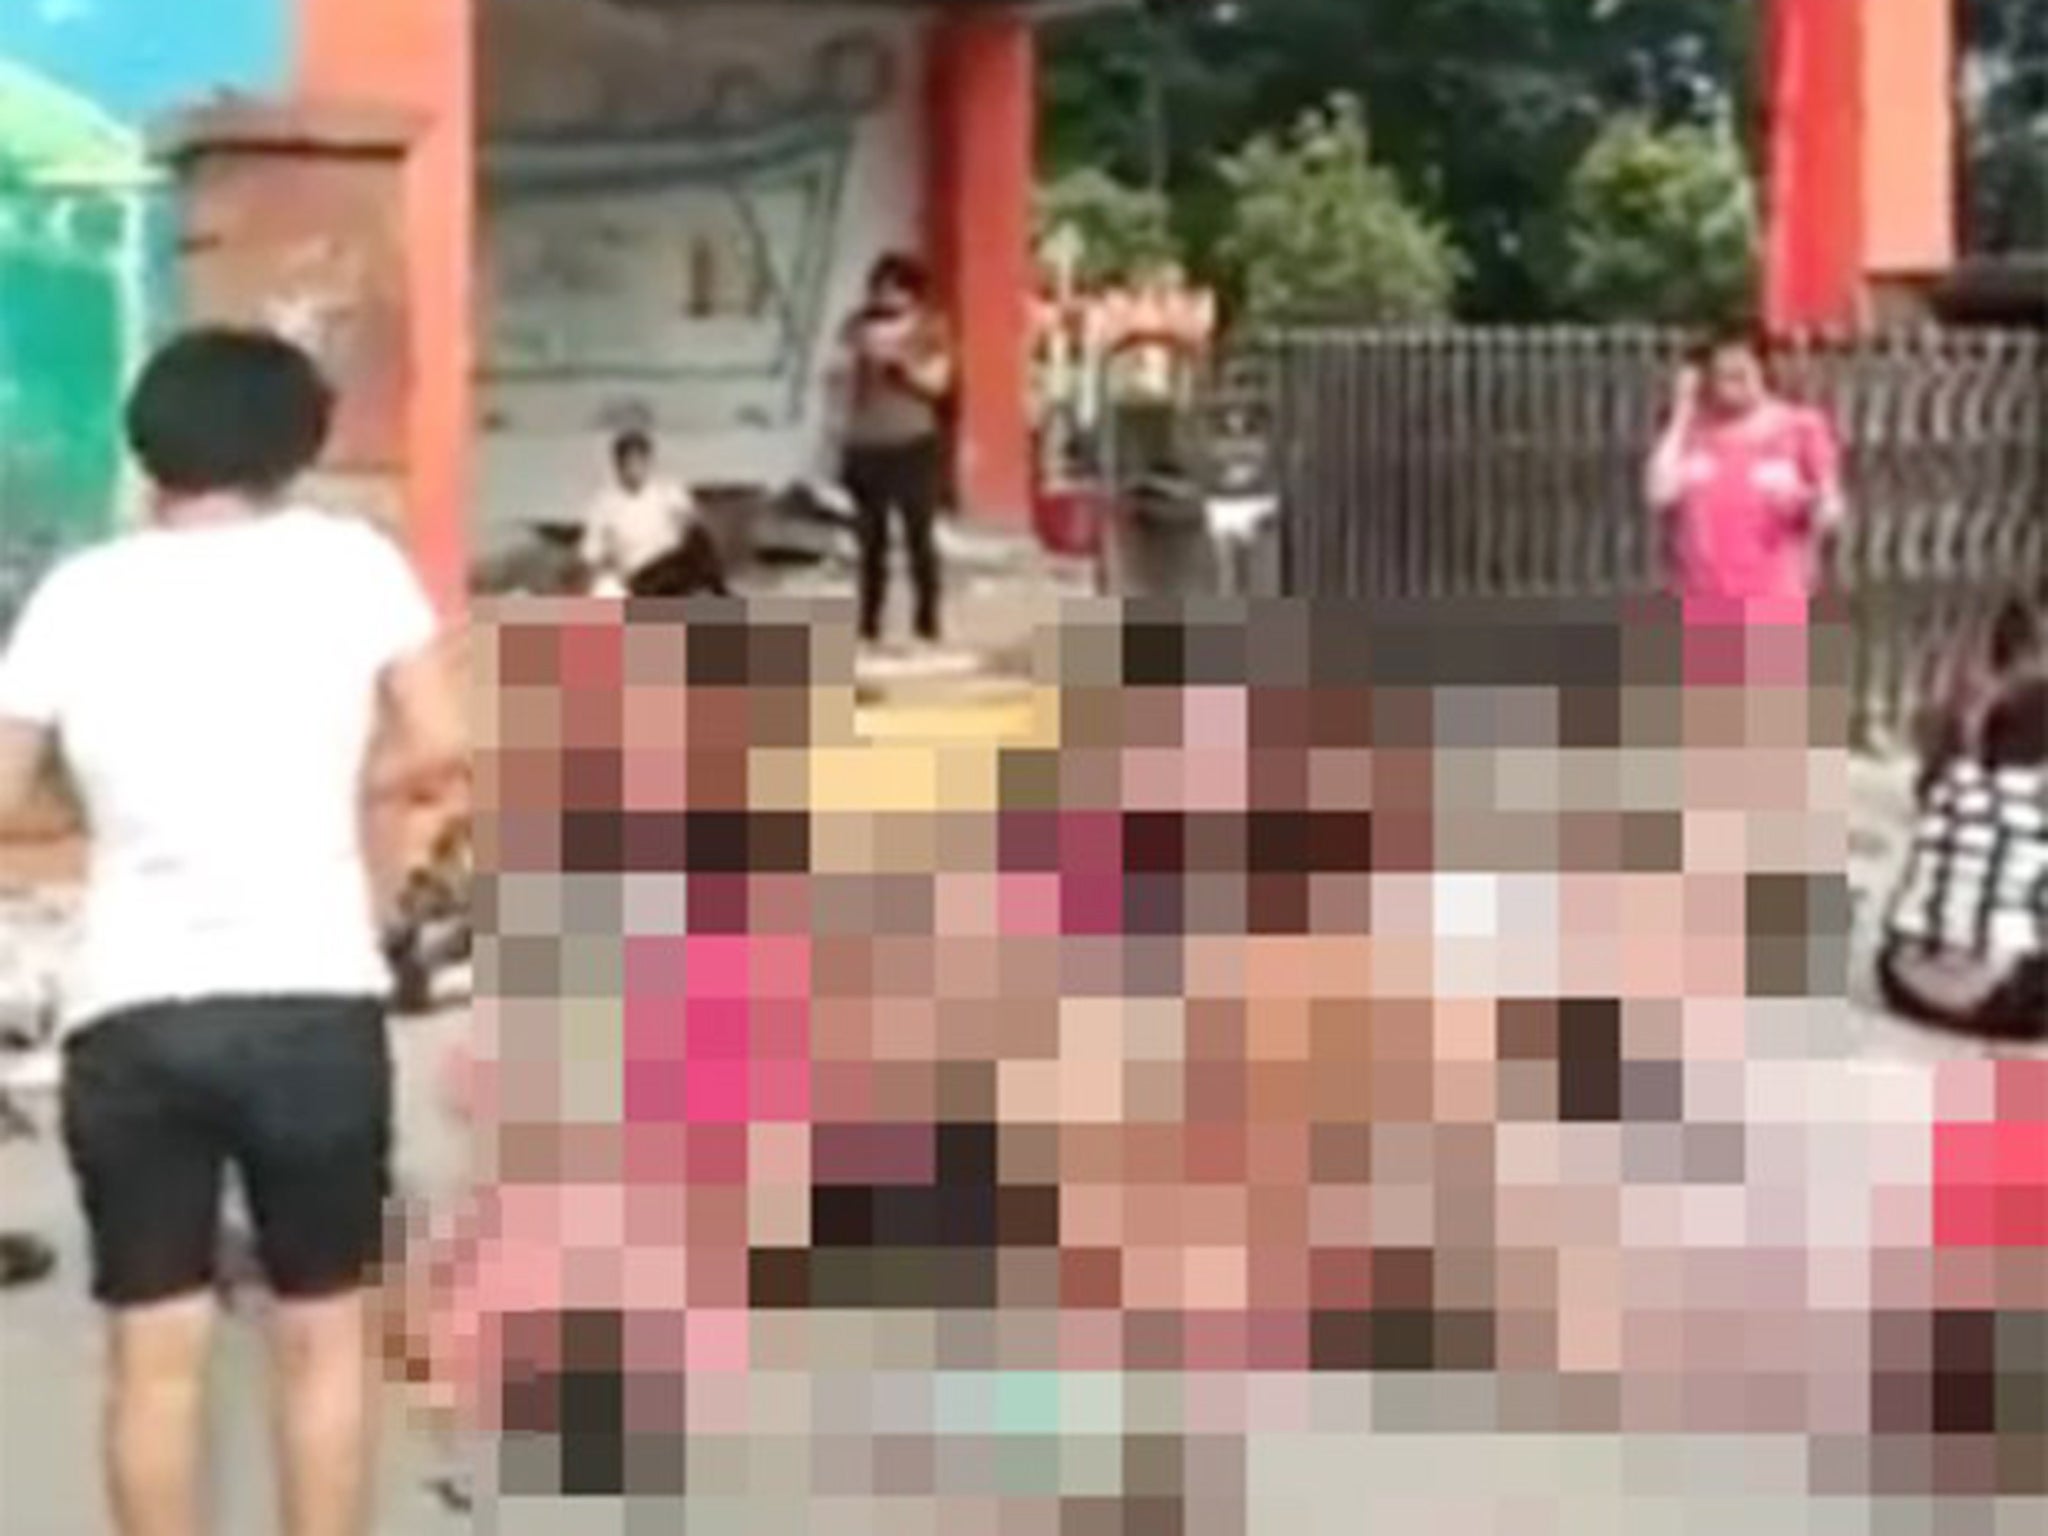 The blast tore through the area as children were being collected from school in Fengxian